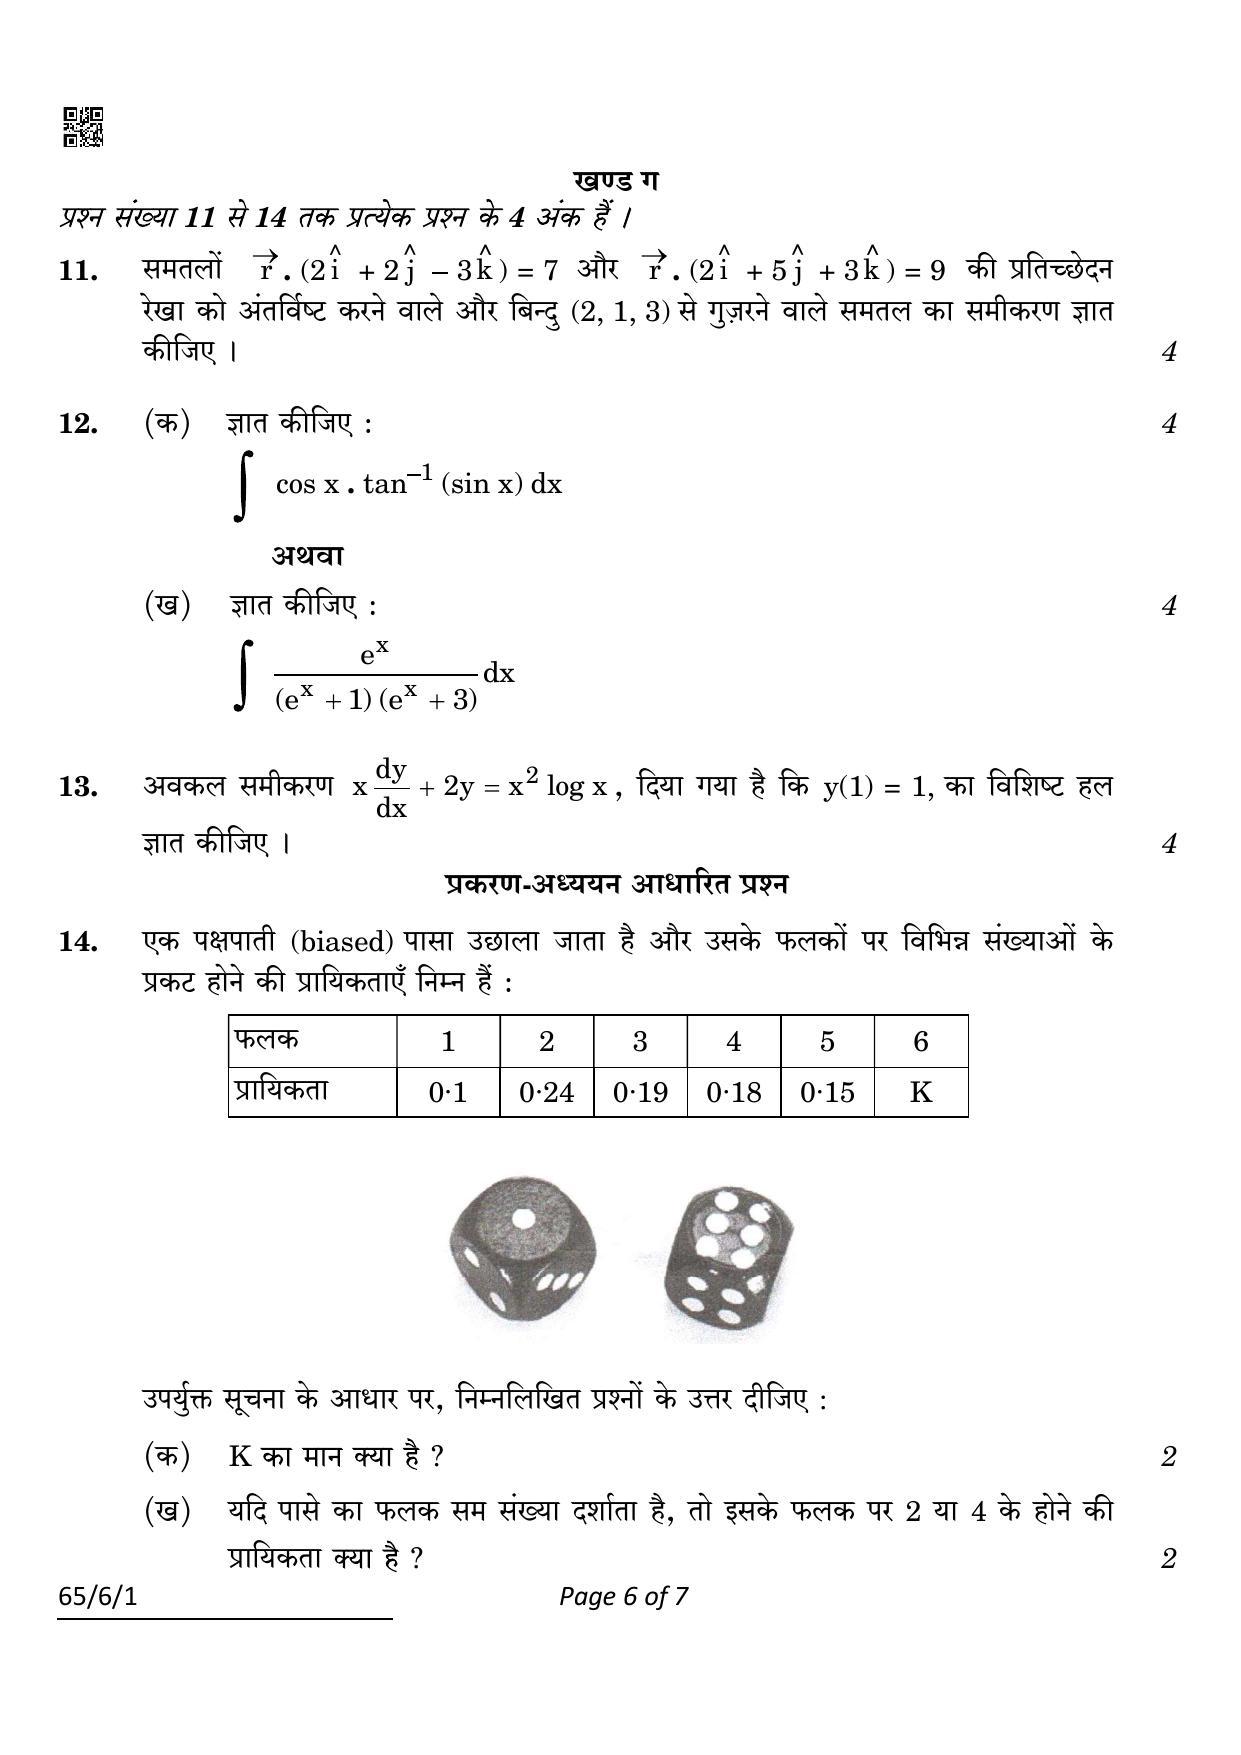 CBSE Class 12 65-6-1 MATHS 2022 Compartment Question Paper - Page 6